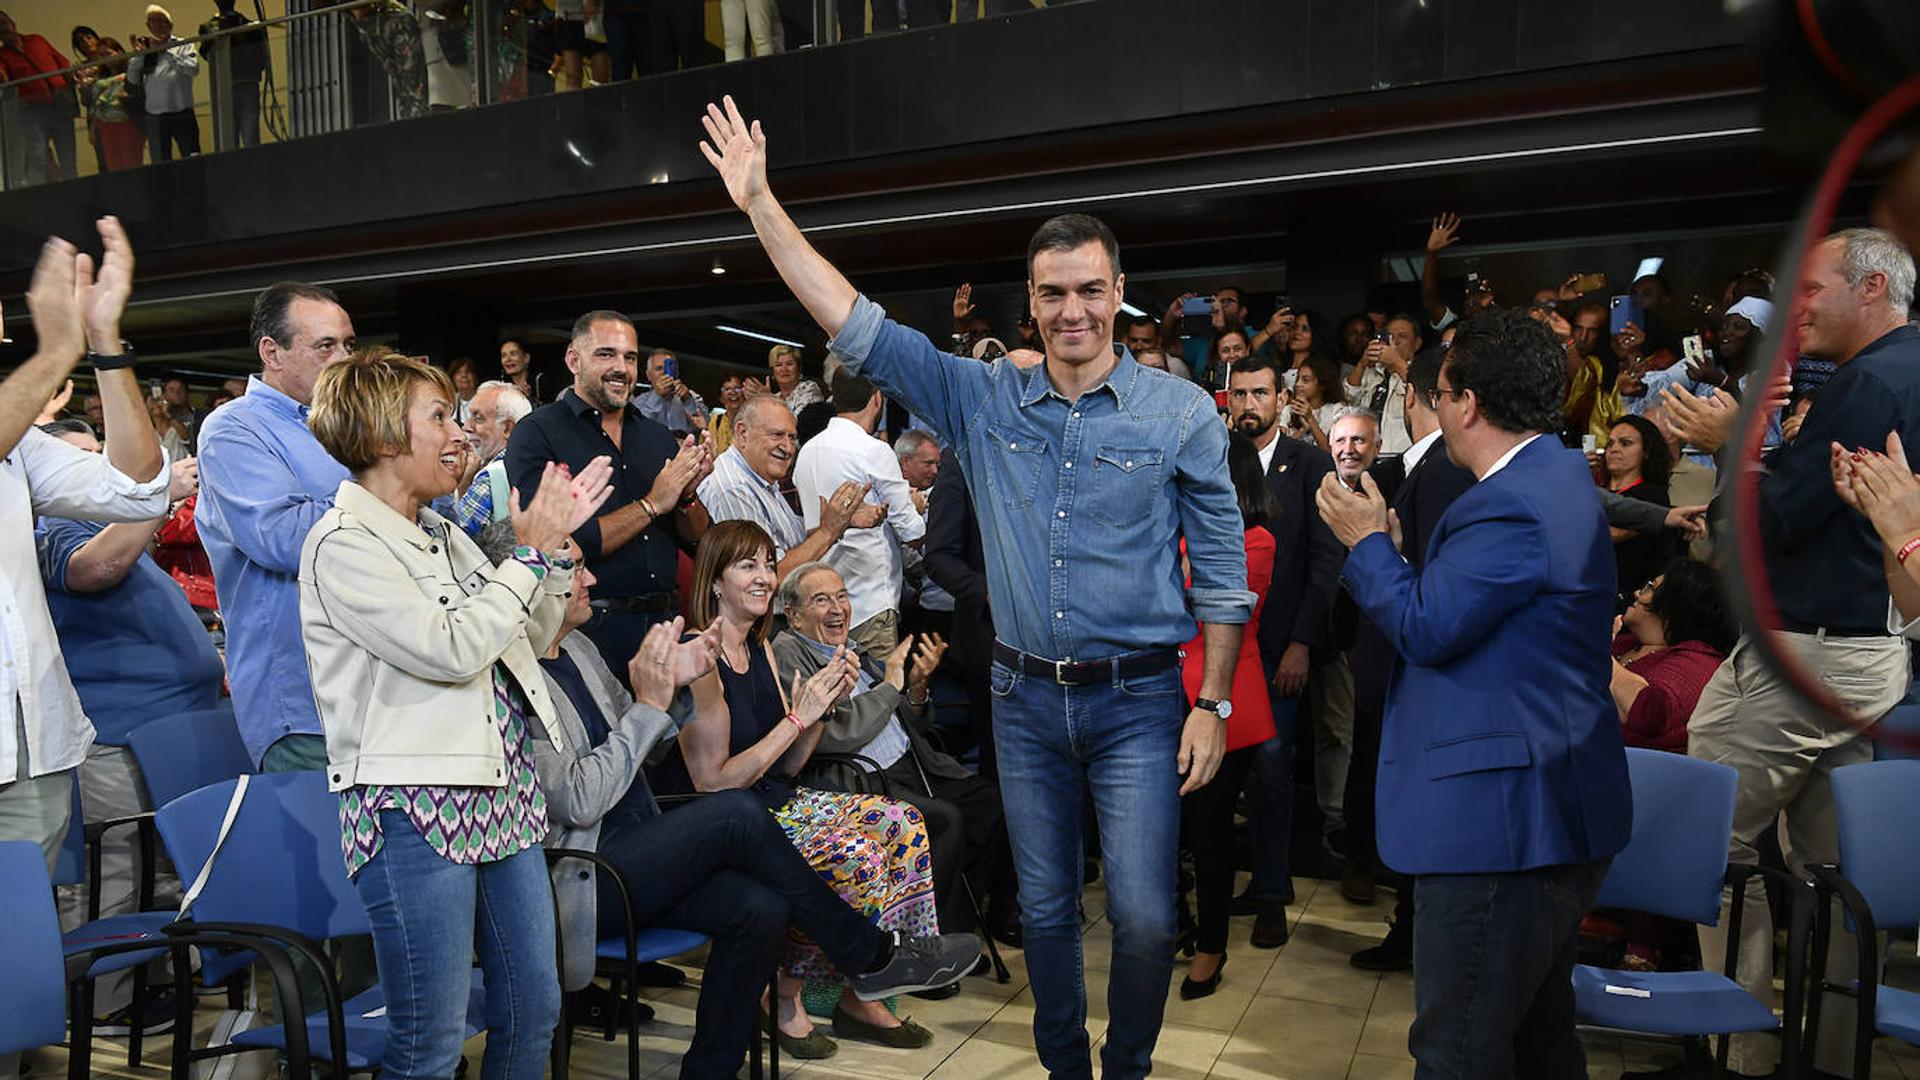 Sánchez intervenes in the presentation ceremony of the PSOE candidacy in Tenerife